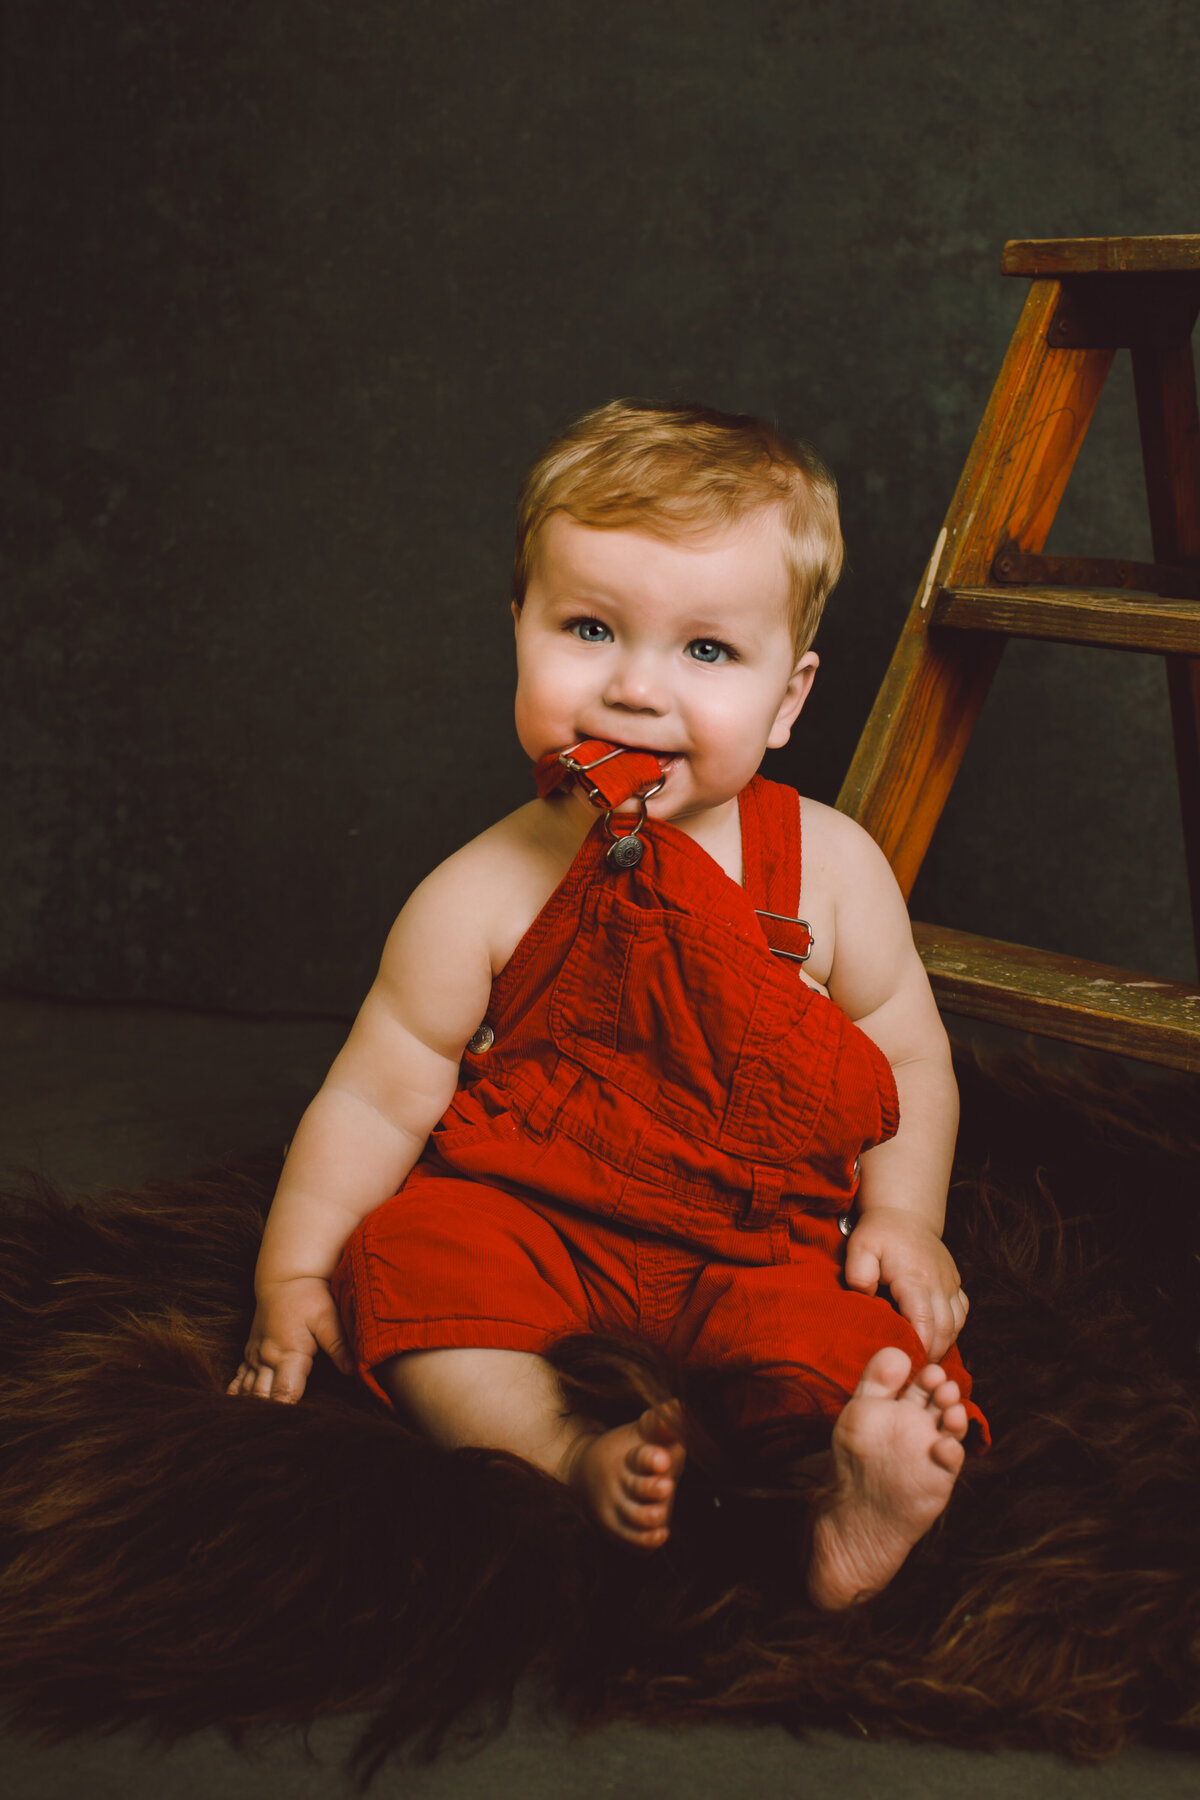 Our Austin and Dripping Springs family photographer is dedicated to telling your unique story